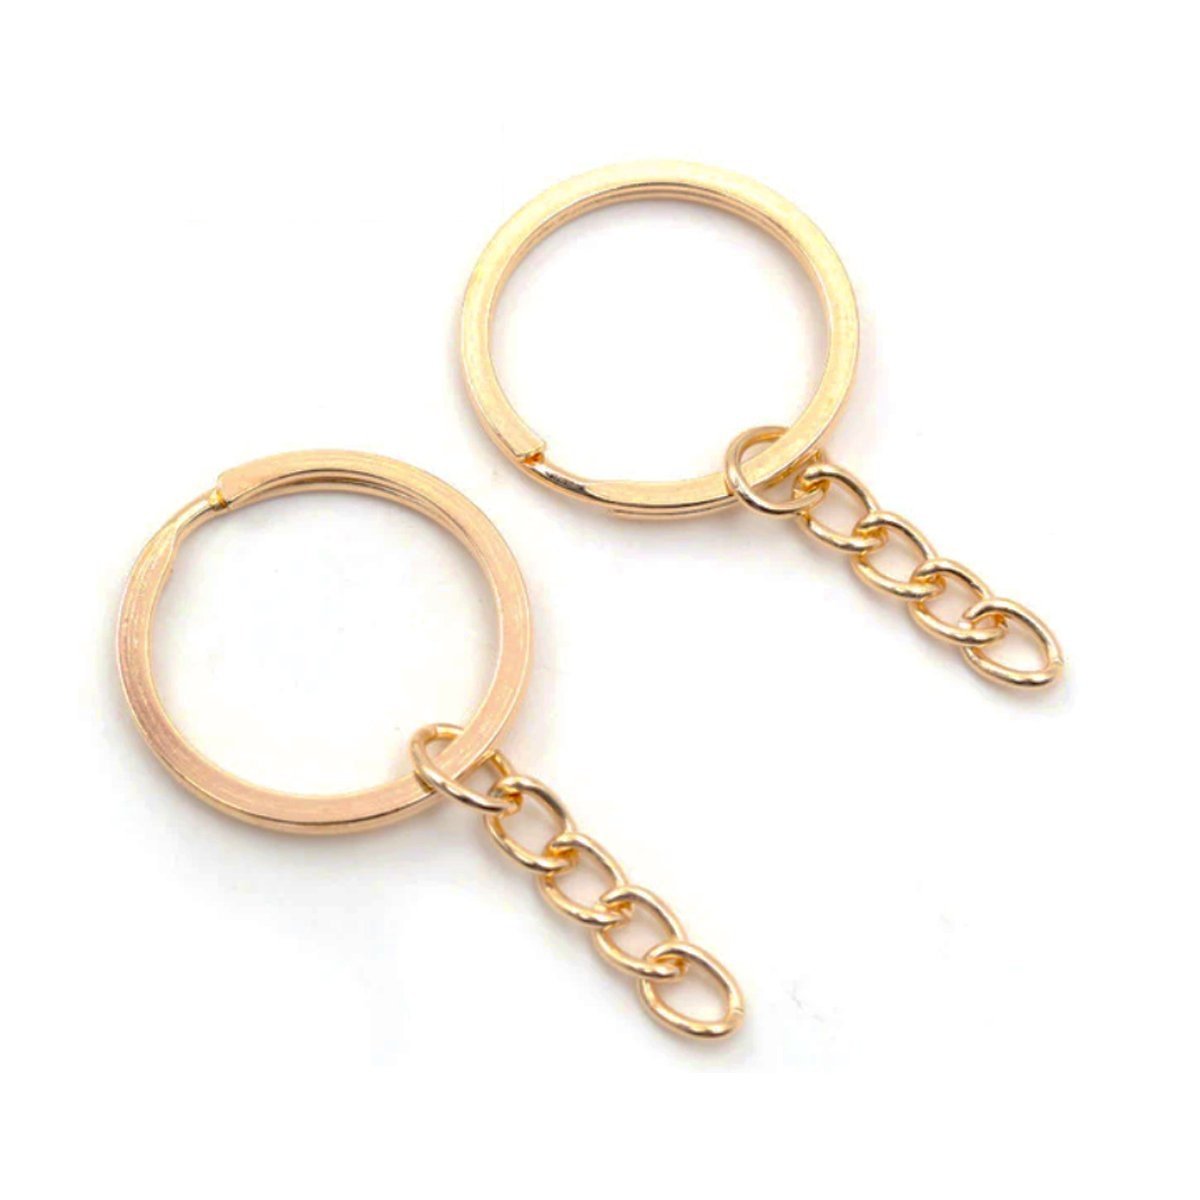 20pcs 30mm Rose Gold Ancient Keyring Keychain Split Ring Chain Key Rings Key Chains - KC Gold - - Asia Sell